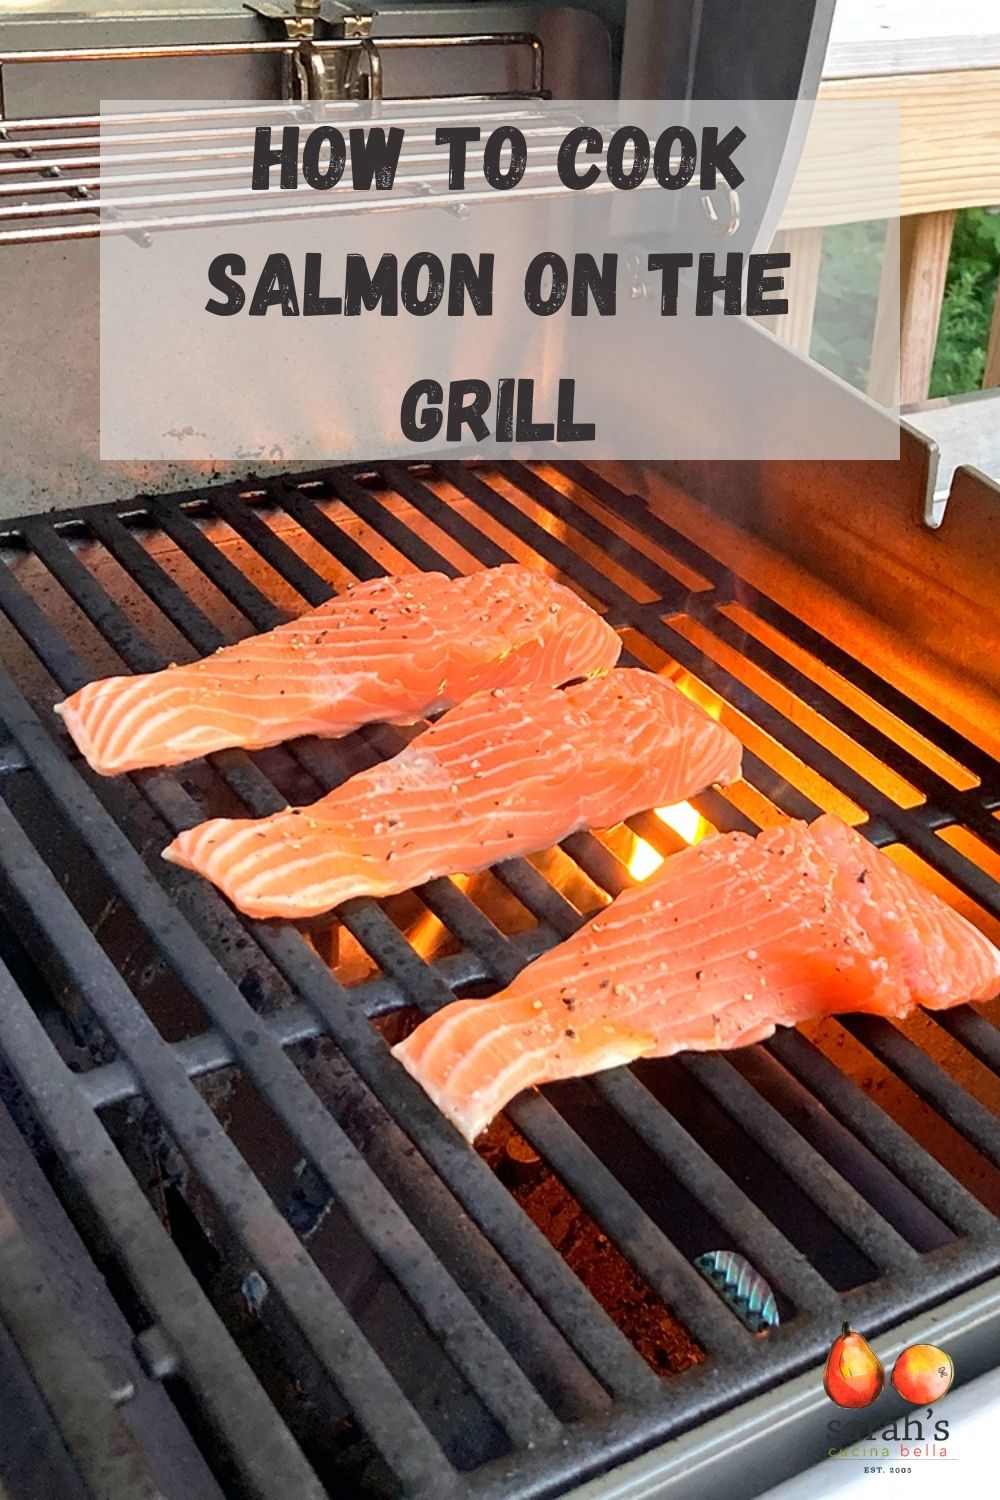 Salmon filets are shown on a lit grill with the words "how to cook salmon on a grill" superimposed over the image.